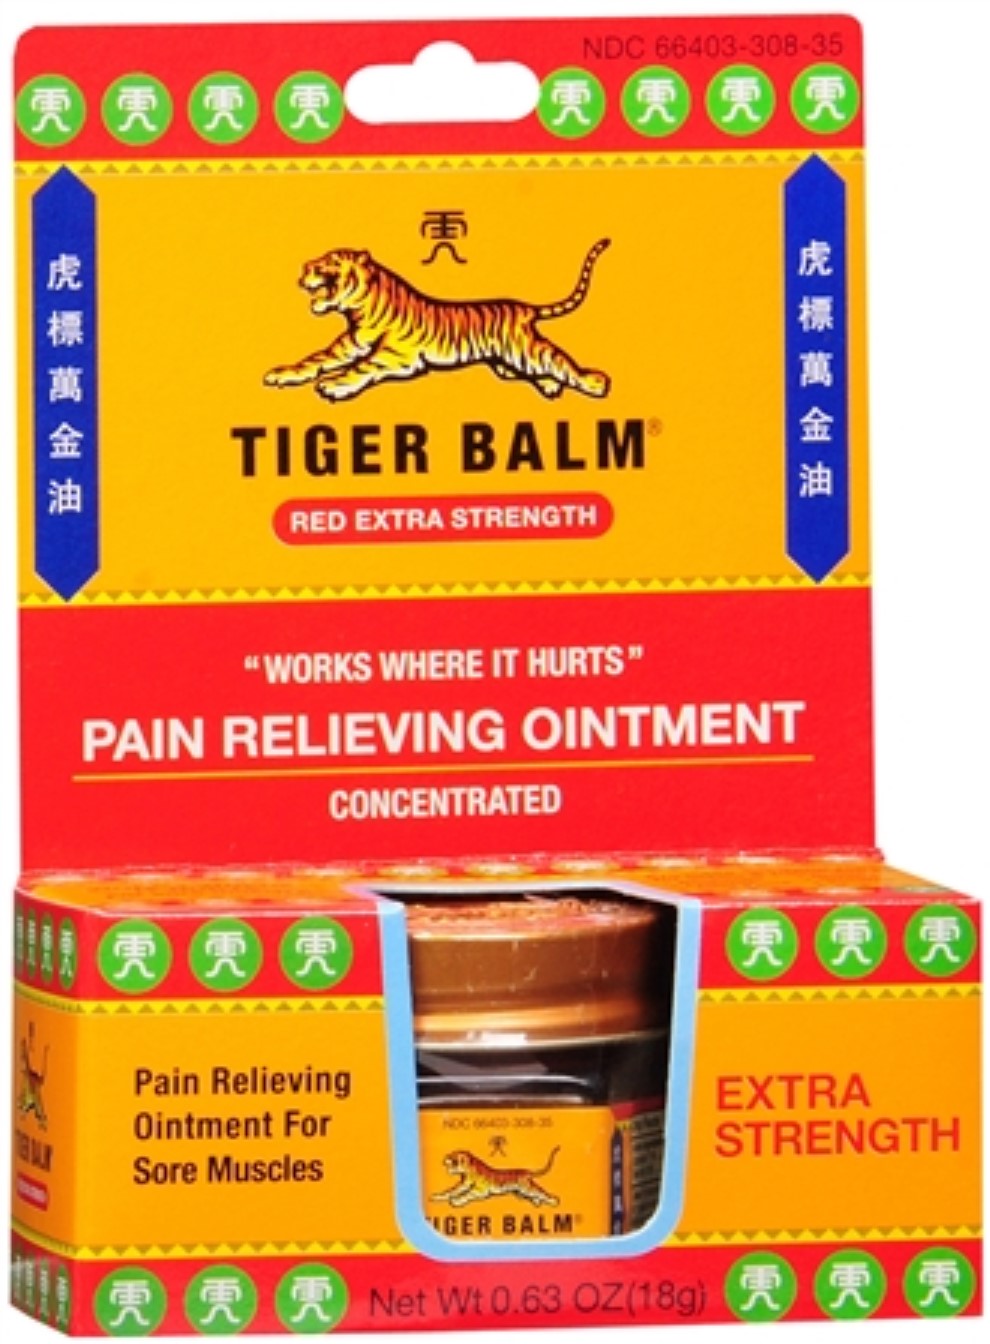 Tiger Balm: Ointment